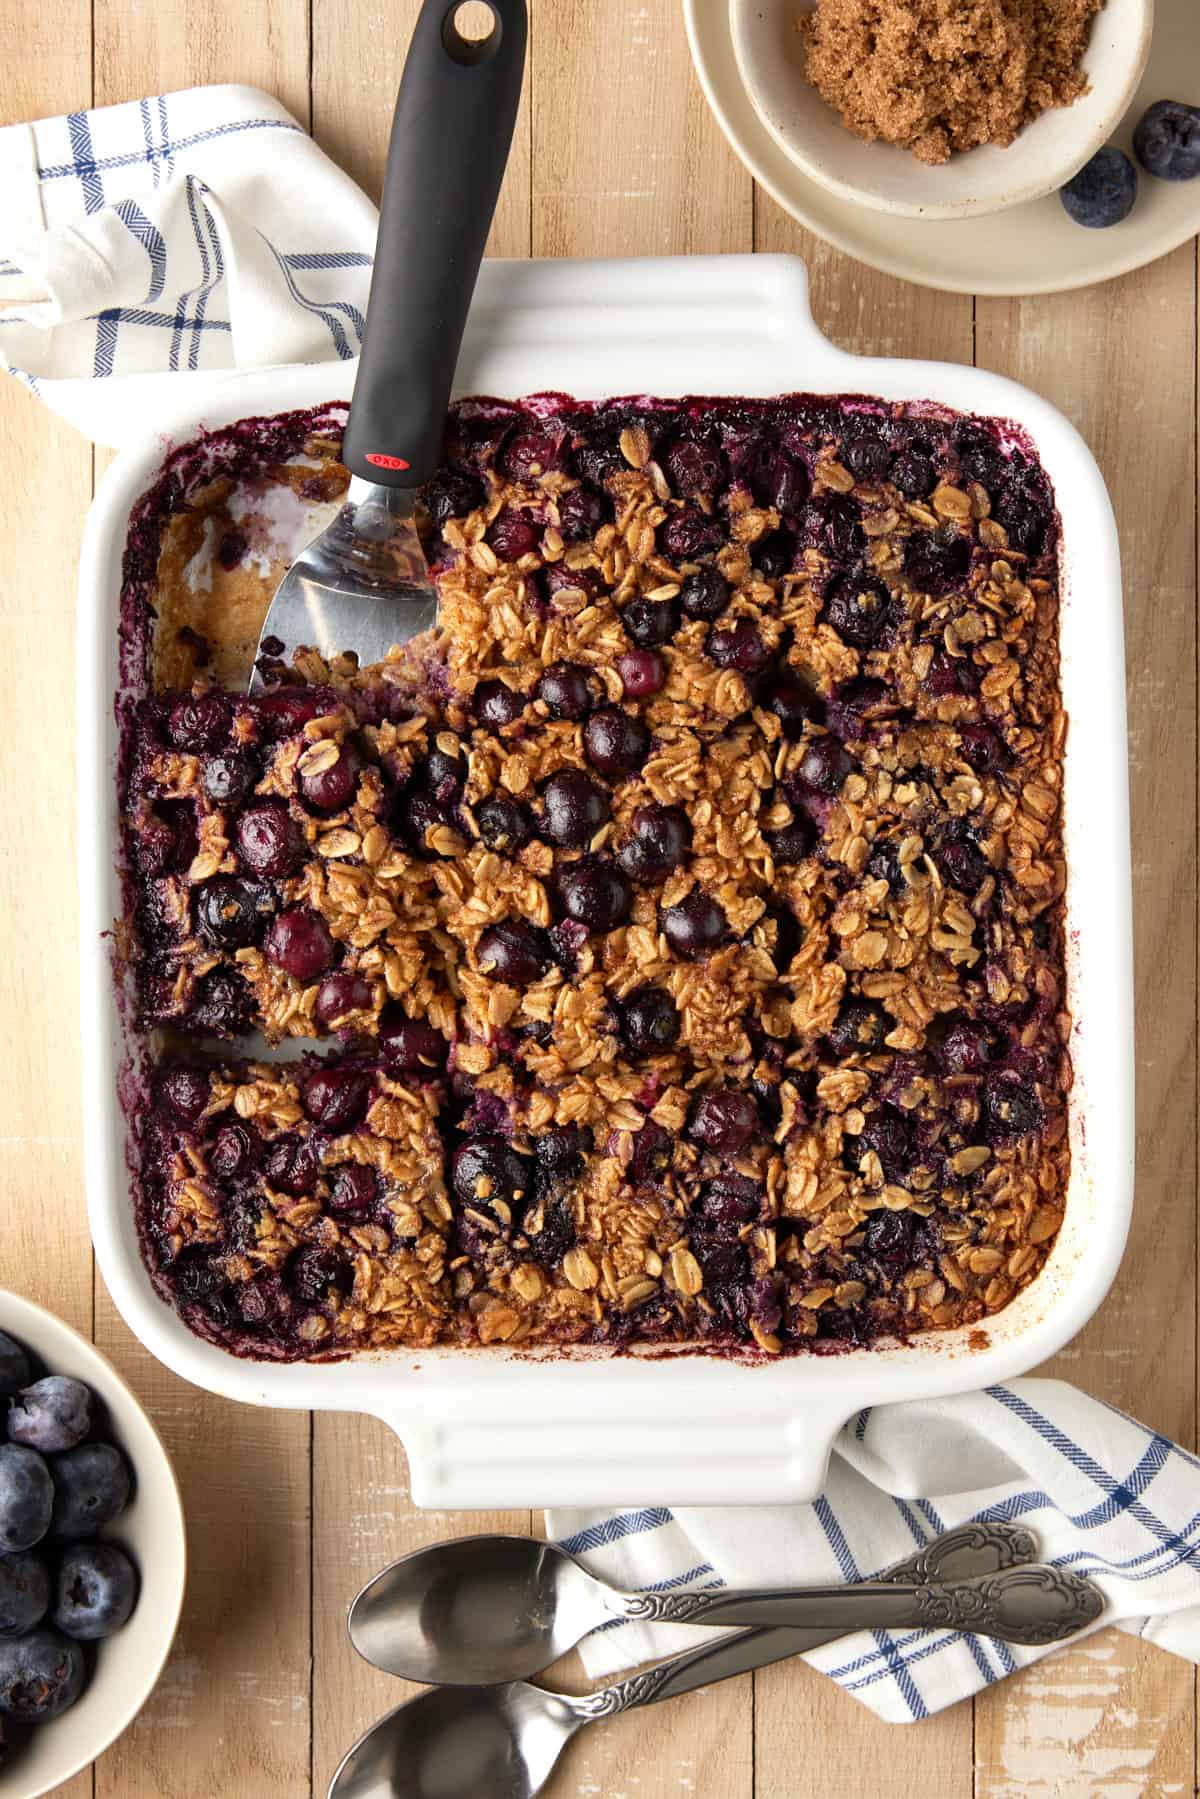 Baked oatmeal with blueberries with brown sugar and fresh blueberries.